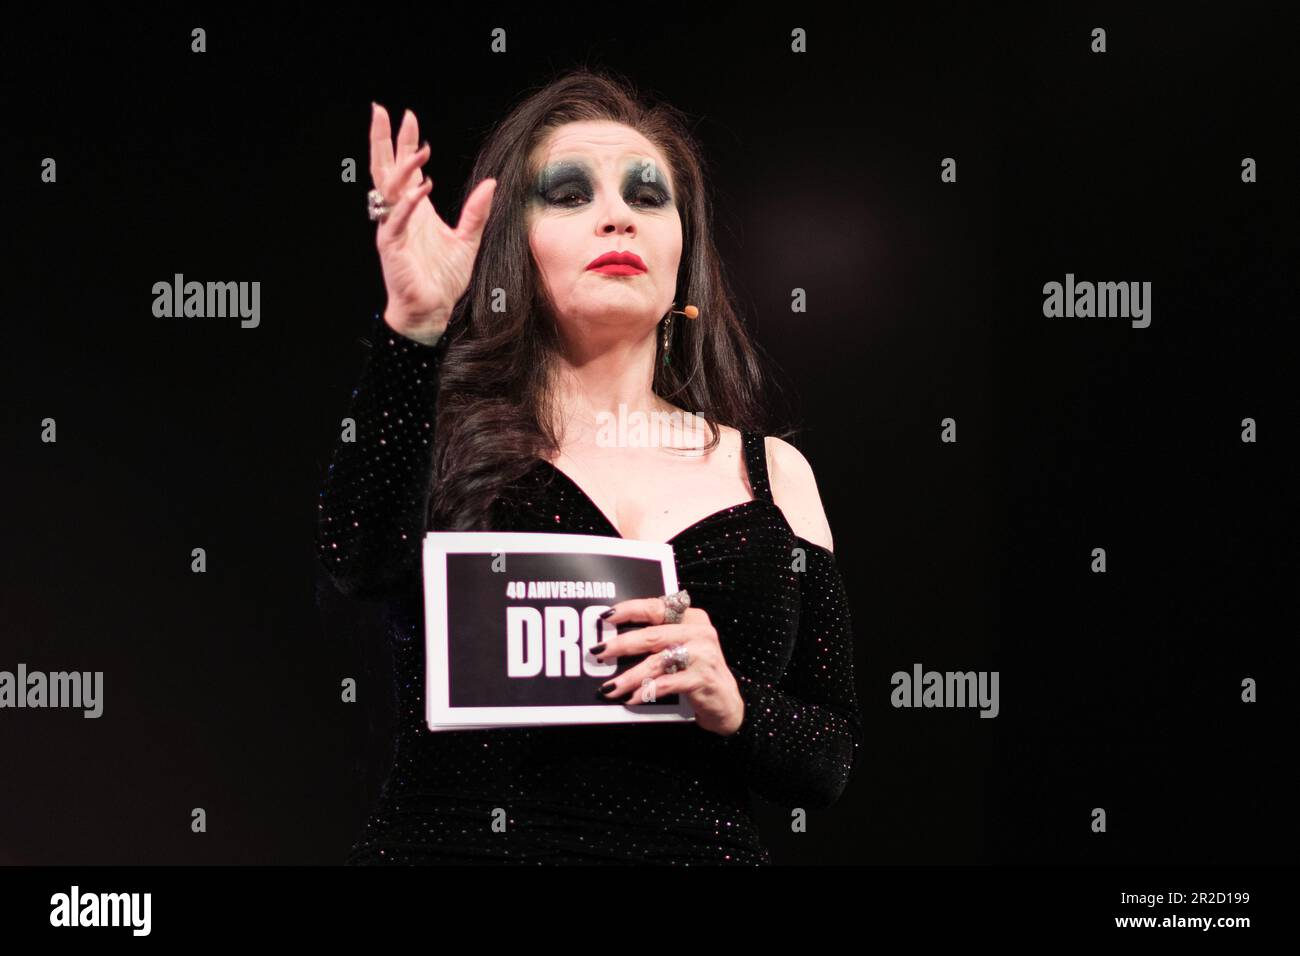 Madrid, Spain. 18th May, 2023. Singer Olvido Gara Jova, better known by her stage name Alaska performs during the DRO 40th anniversary event in Madrid. (Photo by Atilano Garcia/SOPA Images/Sipa USA) Credit: Sipa USA/Alamy Live News Stock Photo